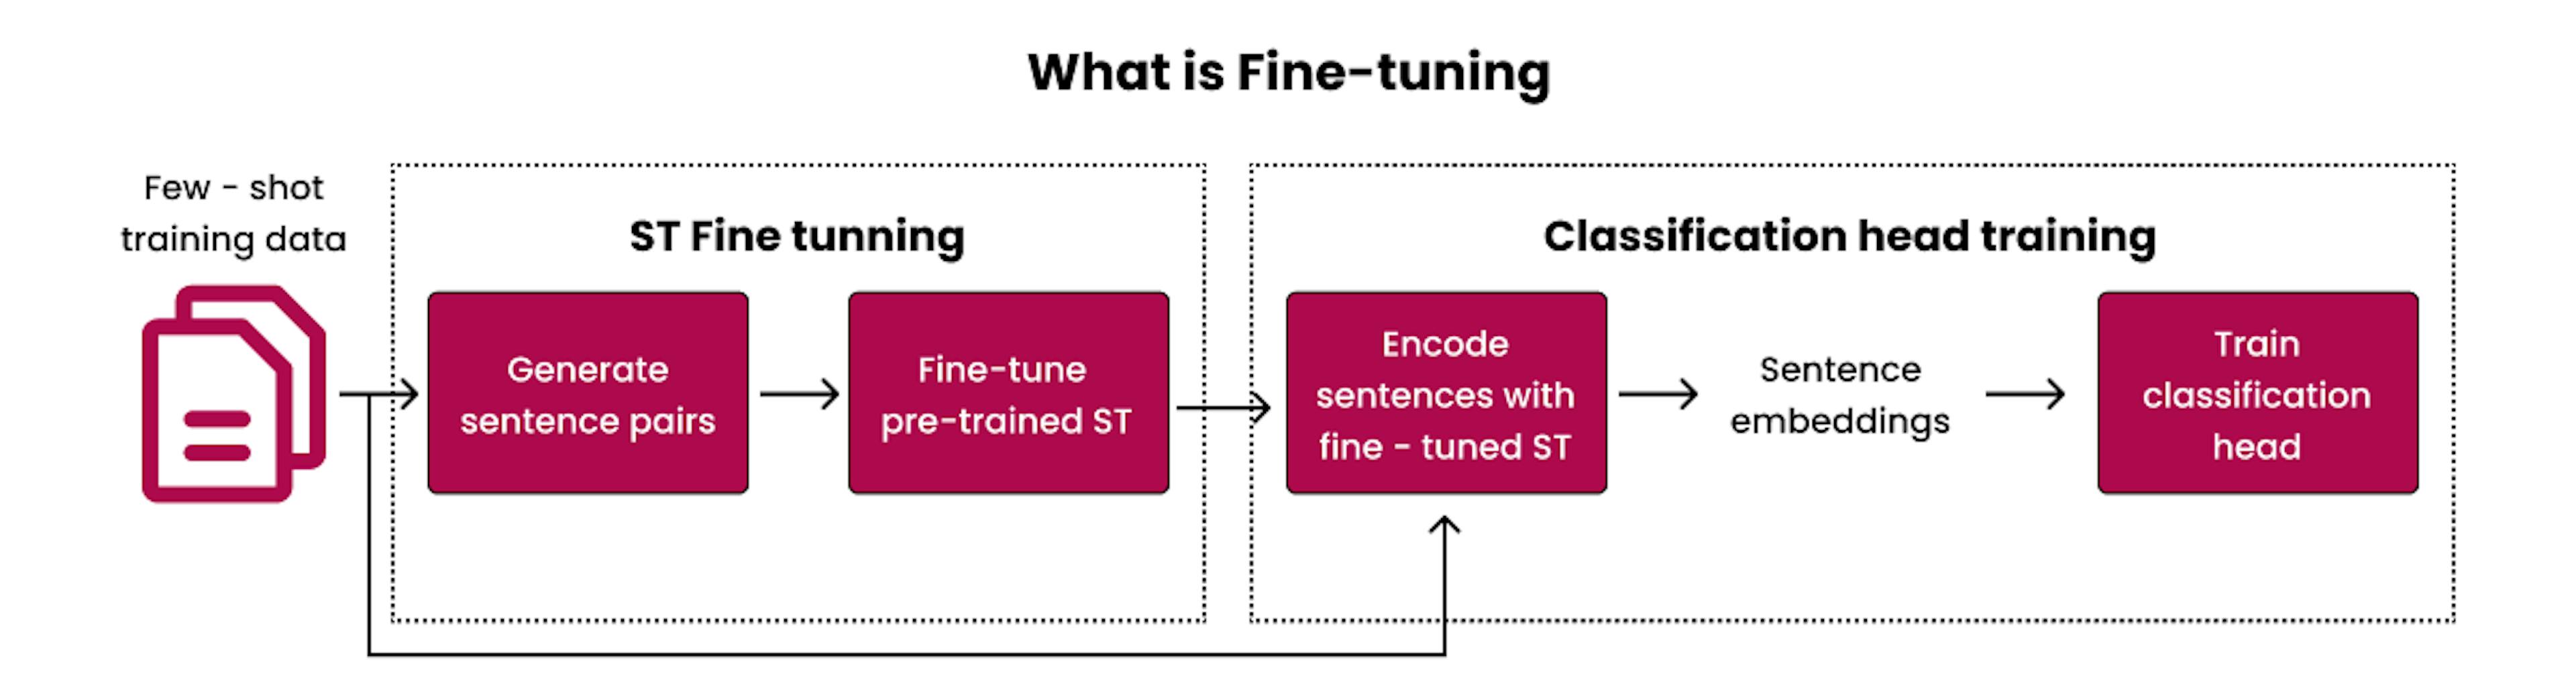 What is Fine-tuning?